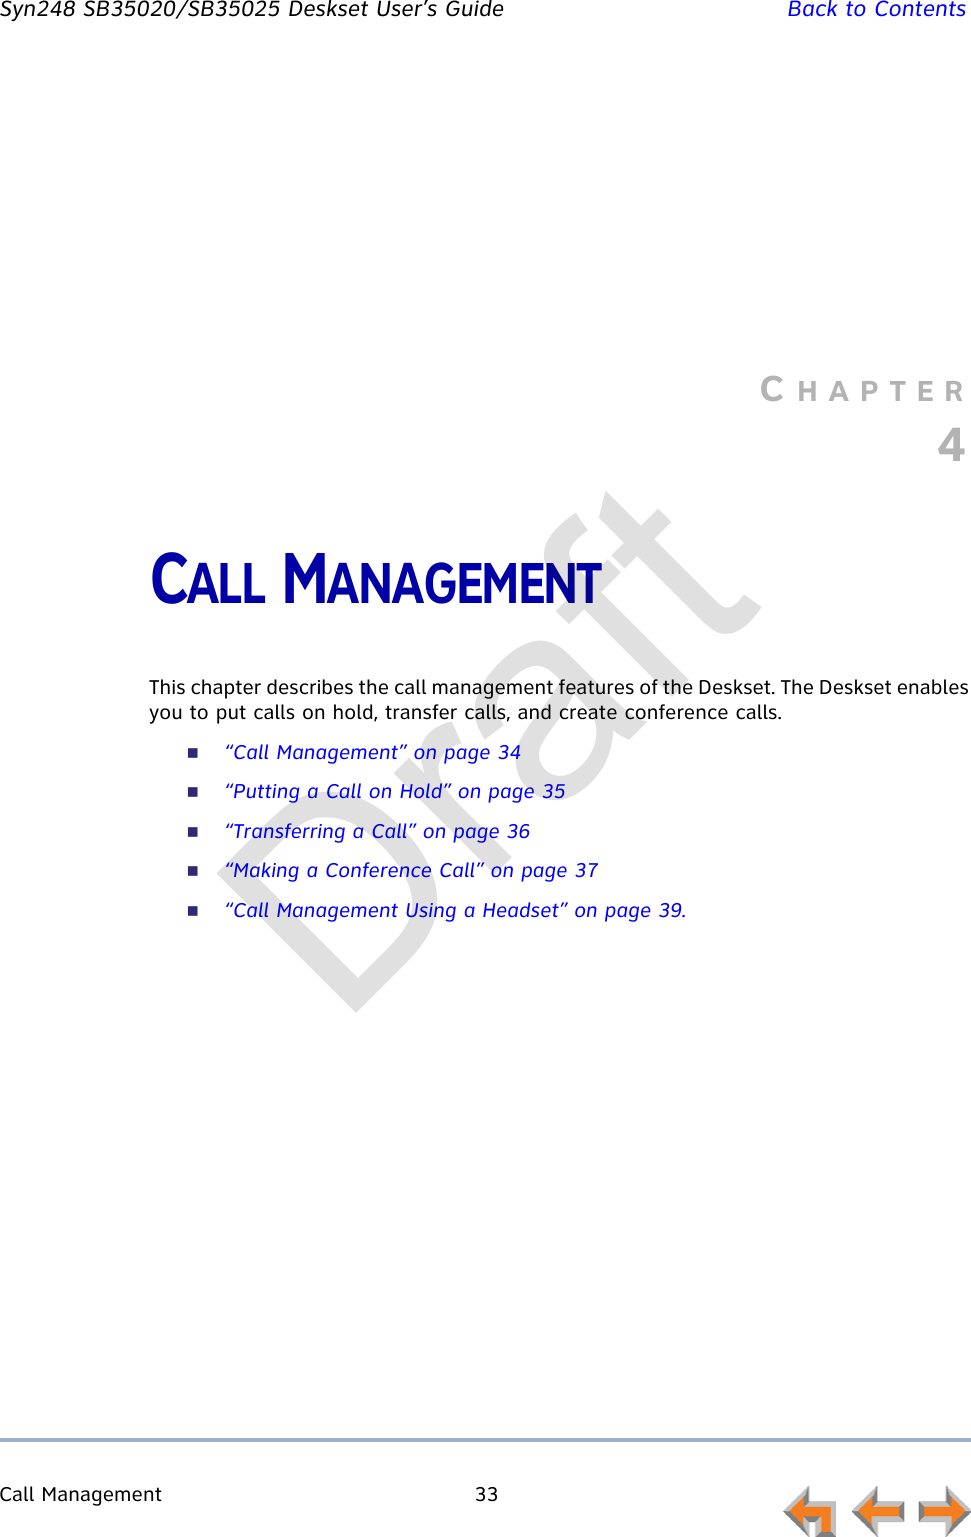 Call Management 33         Syn248 SB35020/SB35025 Deskset User’s Guide Back to ContentsCHAPTER4CALL MANAGEMENTThis chapter describes the call management features of the Deskset. The Deskset enables you to put calls on hold, transfer calls, and create conference calls.“Call Management” on page 34“Putting a Call on Hold” on page 35“Transferring a Call” on page 36“Making a Conference Call” on page 37“Call Management Using a Headset” on page 39.Draft